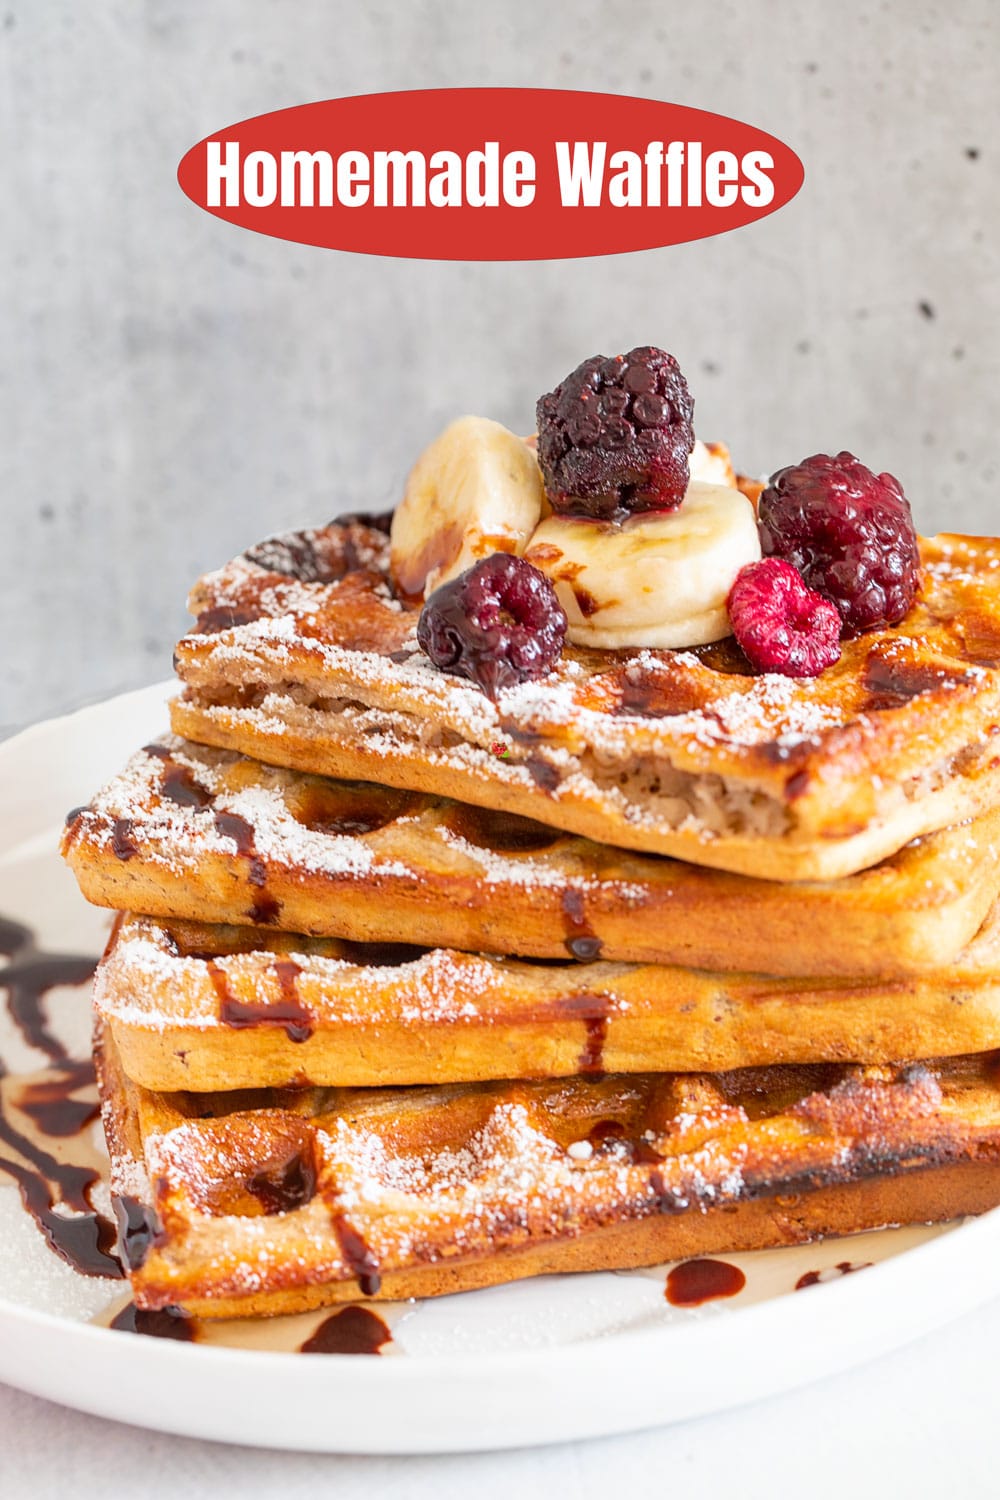 Front view of 4 waffles stack topped with chocolate sauce, maple syrup, bananas and berries